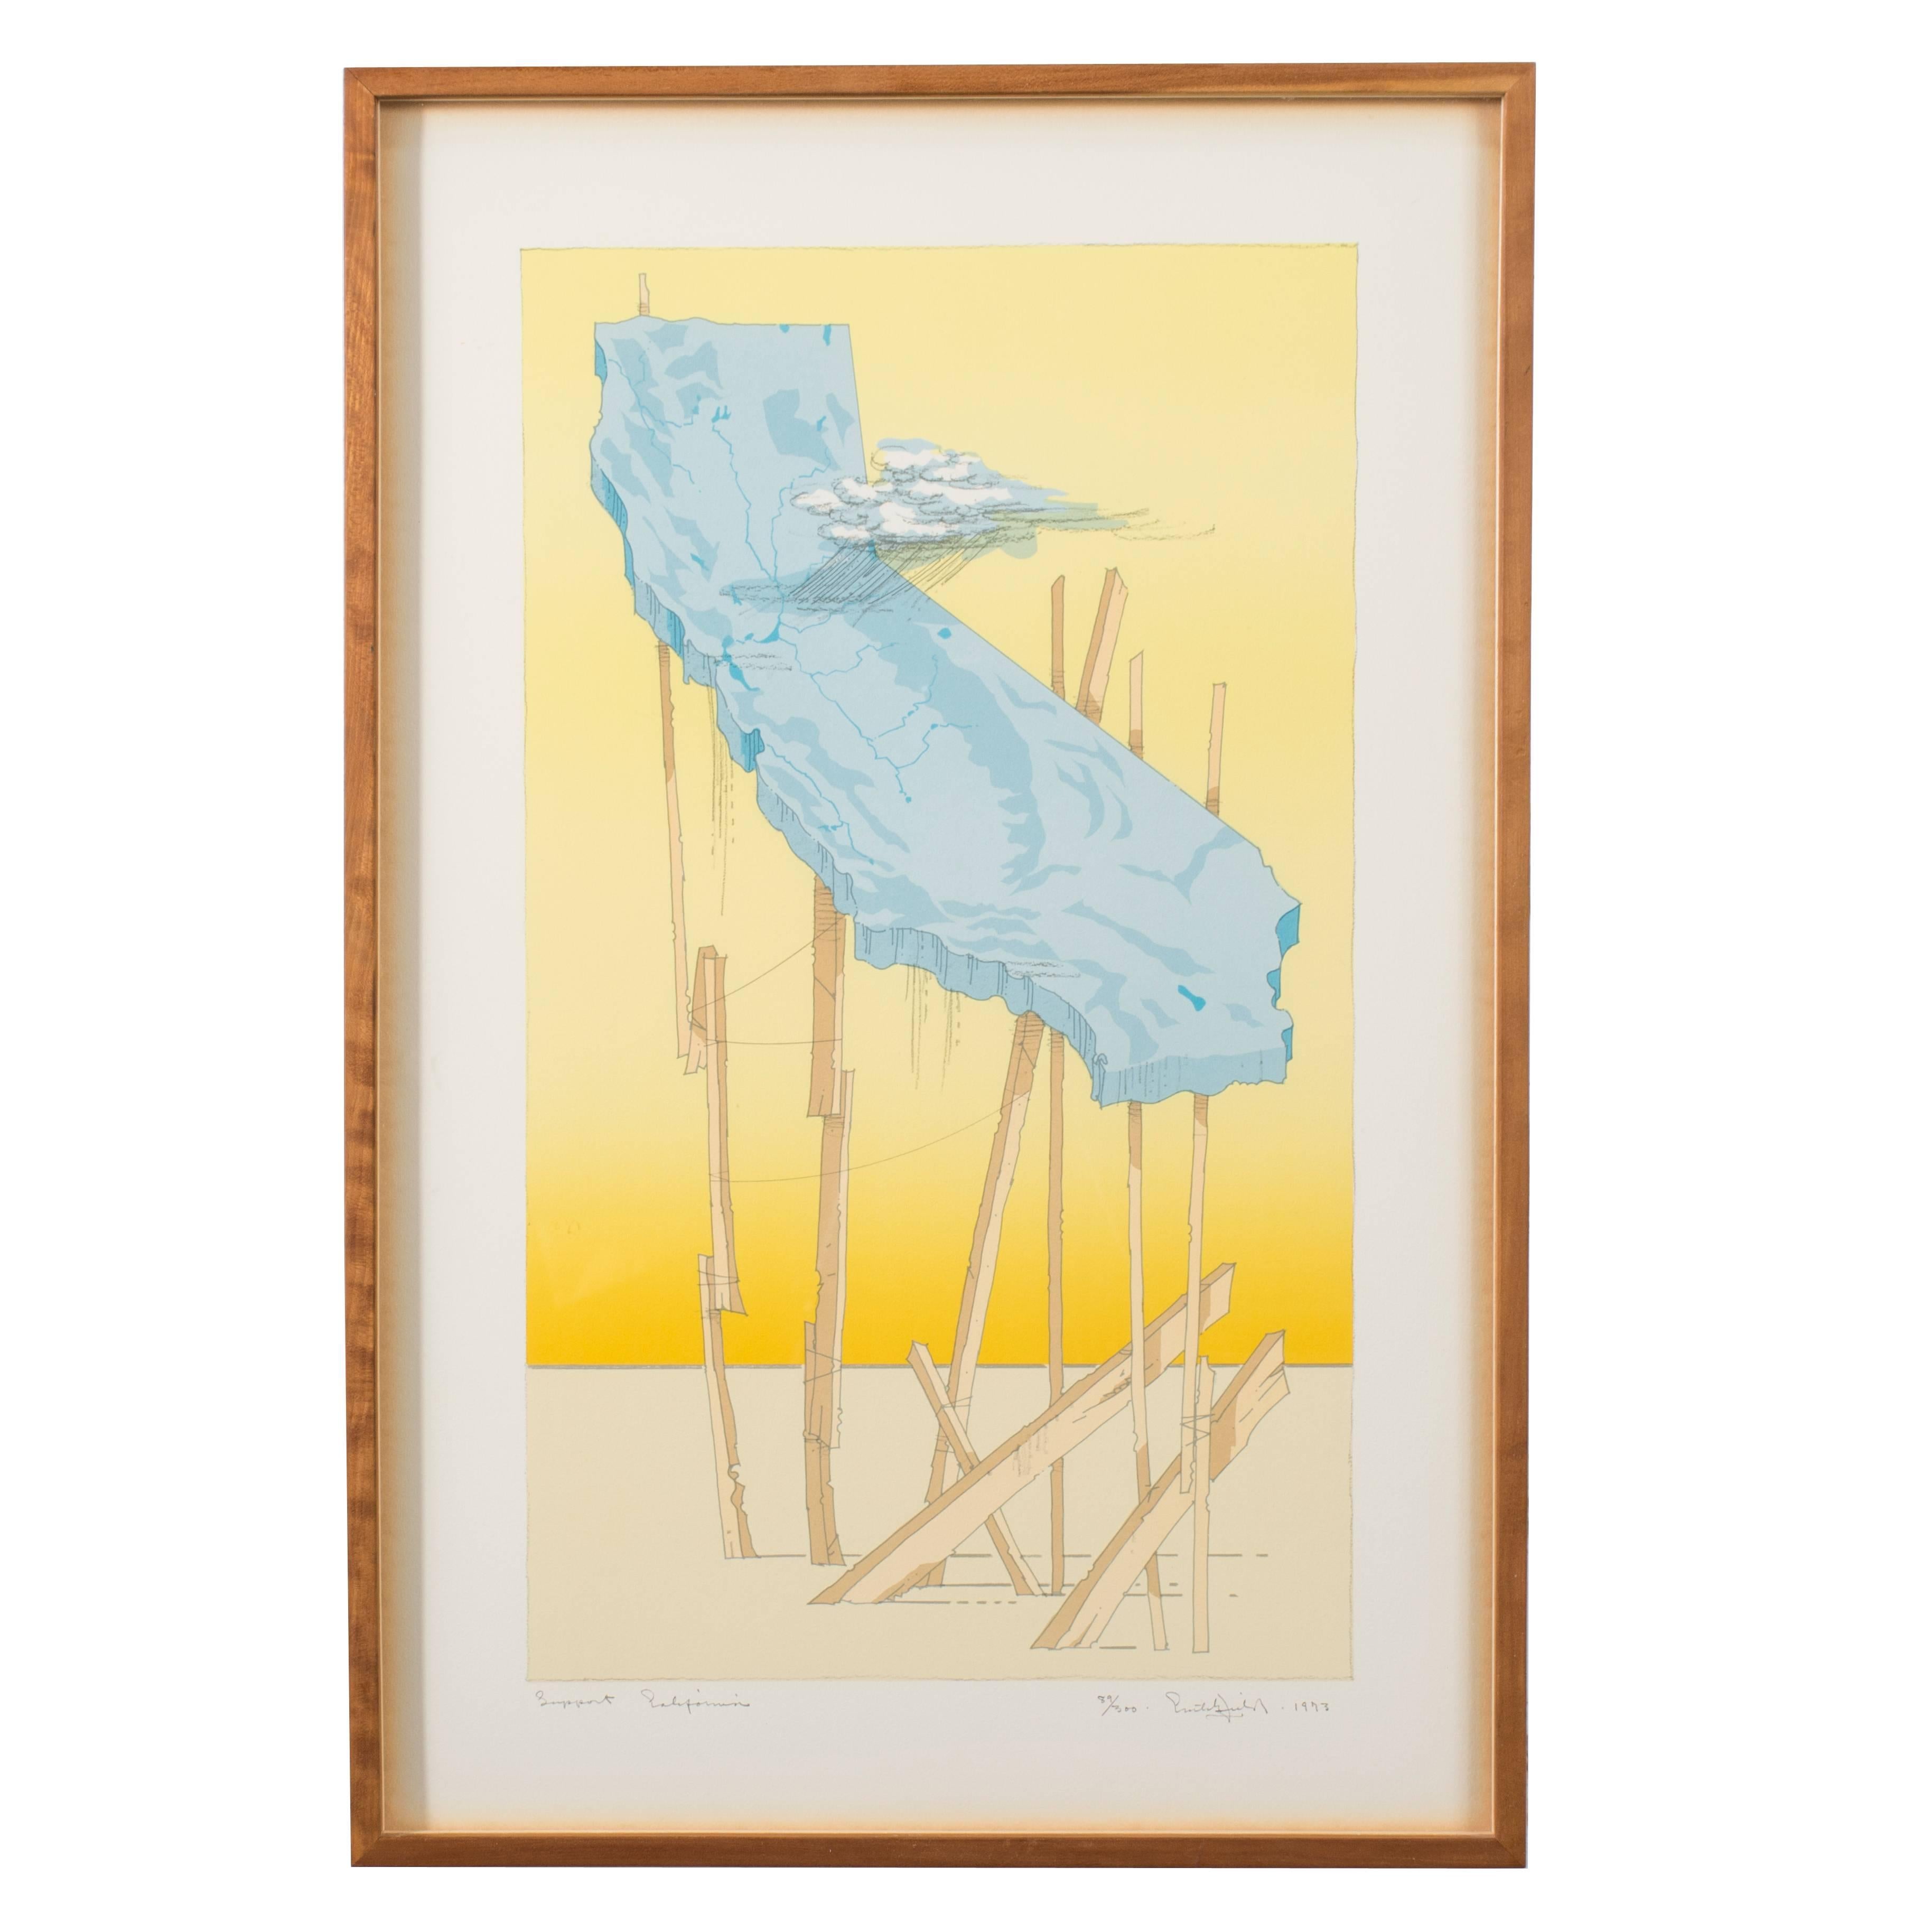 'Support California' Framed Lithograph by William Crutchfield, 1973